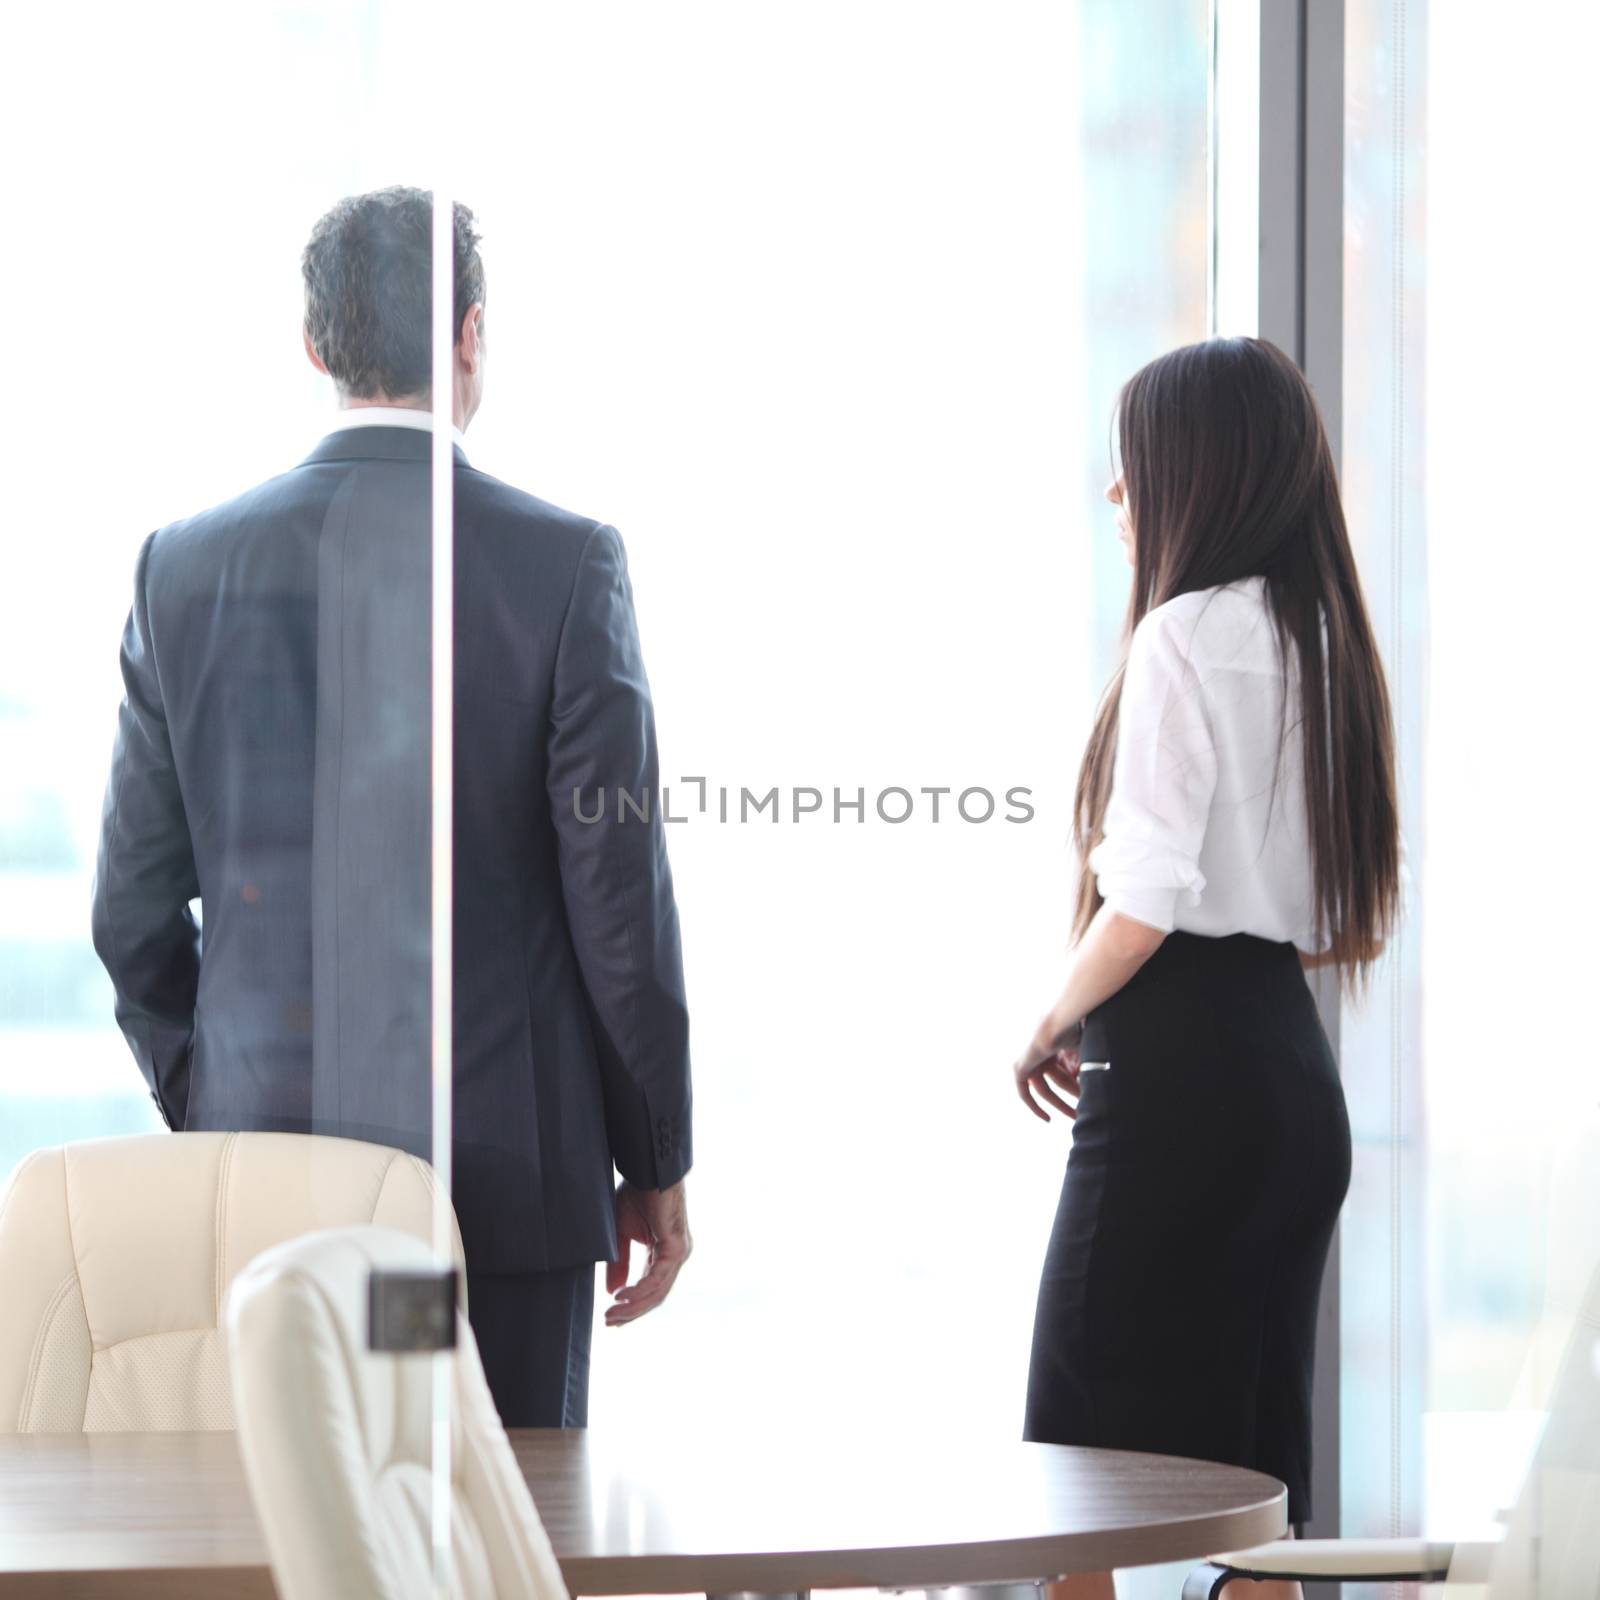 Business people looking at window by ALotOfPeople